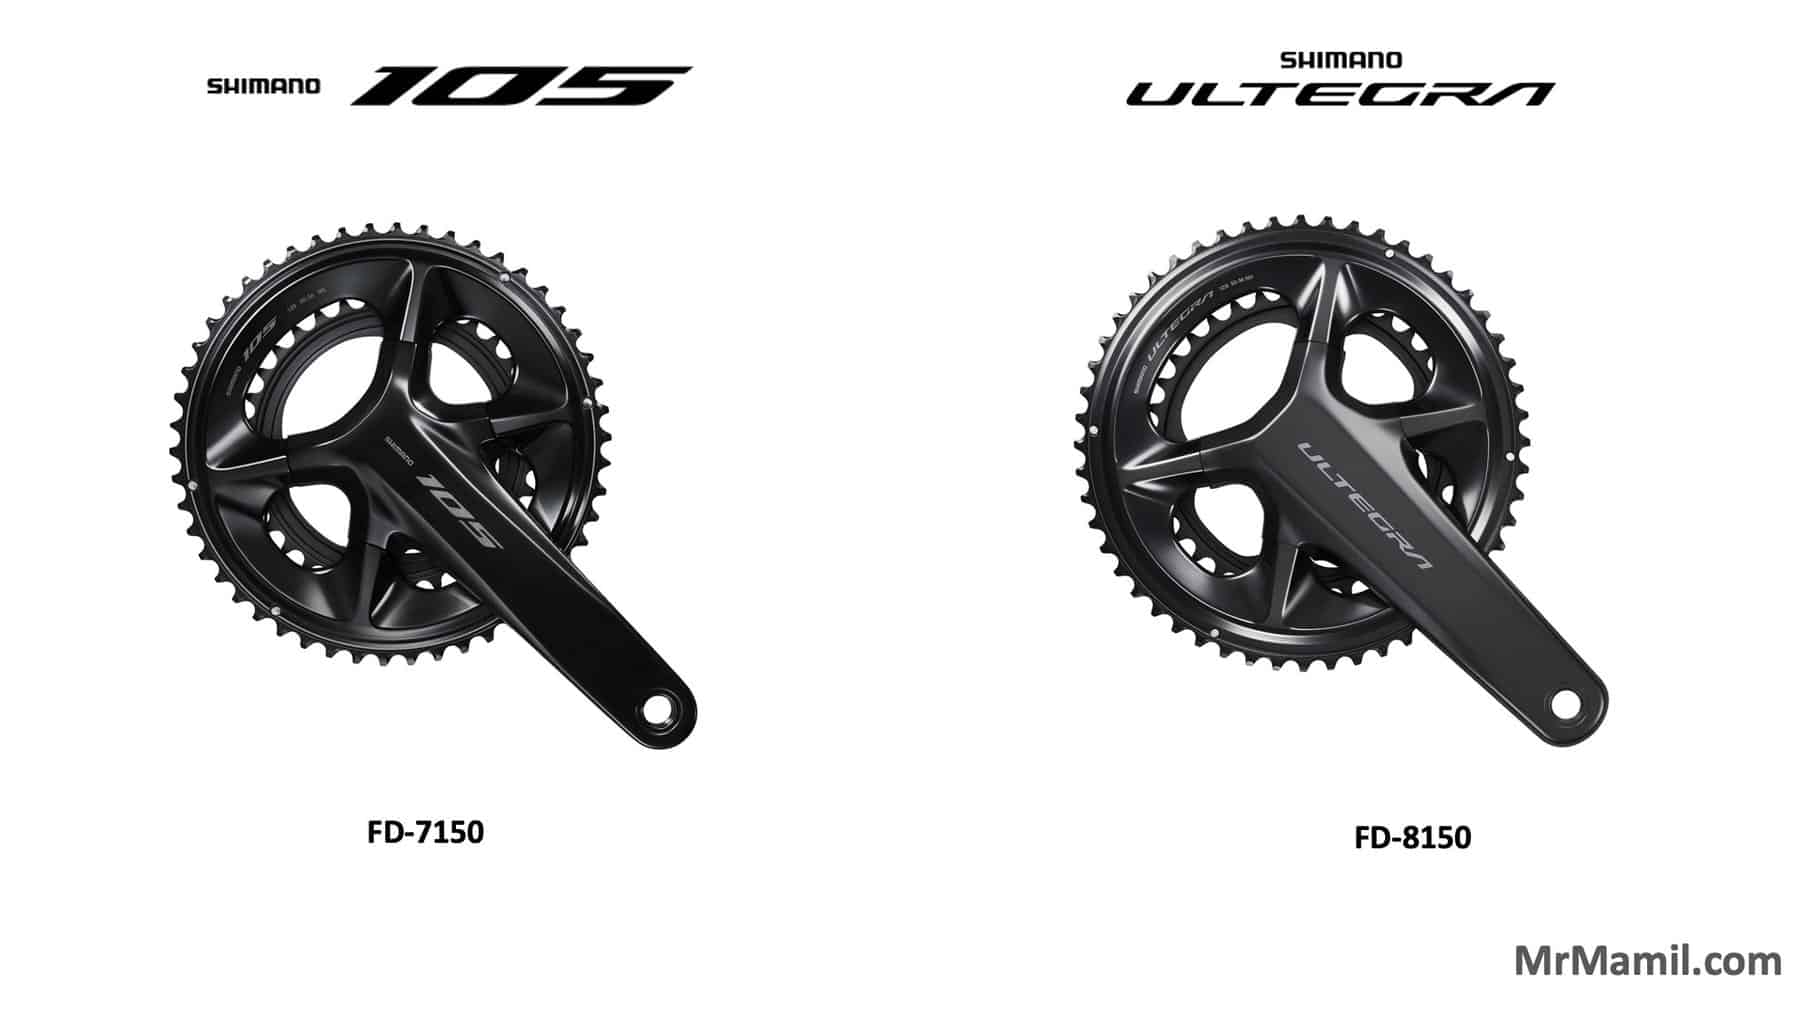 Side-by-side comparison of Shimano bicycle cranksets On the left, a Shimano 105 crankset labeled FC-7150. On the right, a Shimano Ultegra crankset labeled FC-8150.